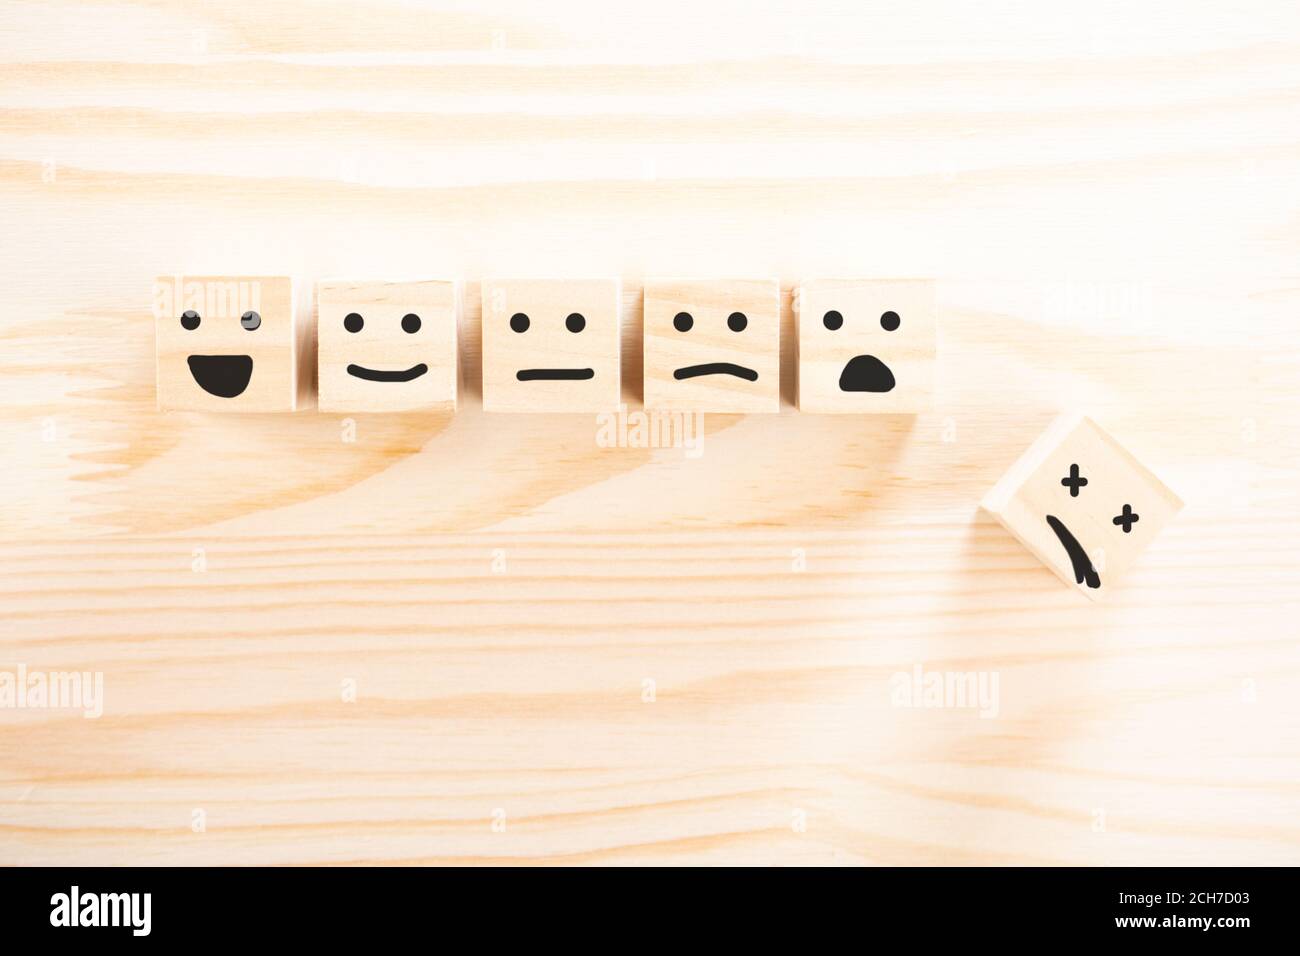 wooden cubes that Express different emotions. smile face icon symbol on wooden cube on wooden background. concept of different emotional state of a pe Stock Photo